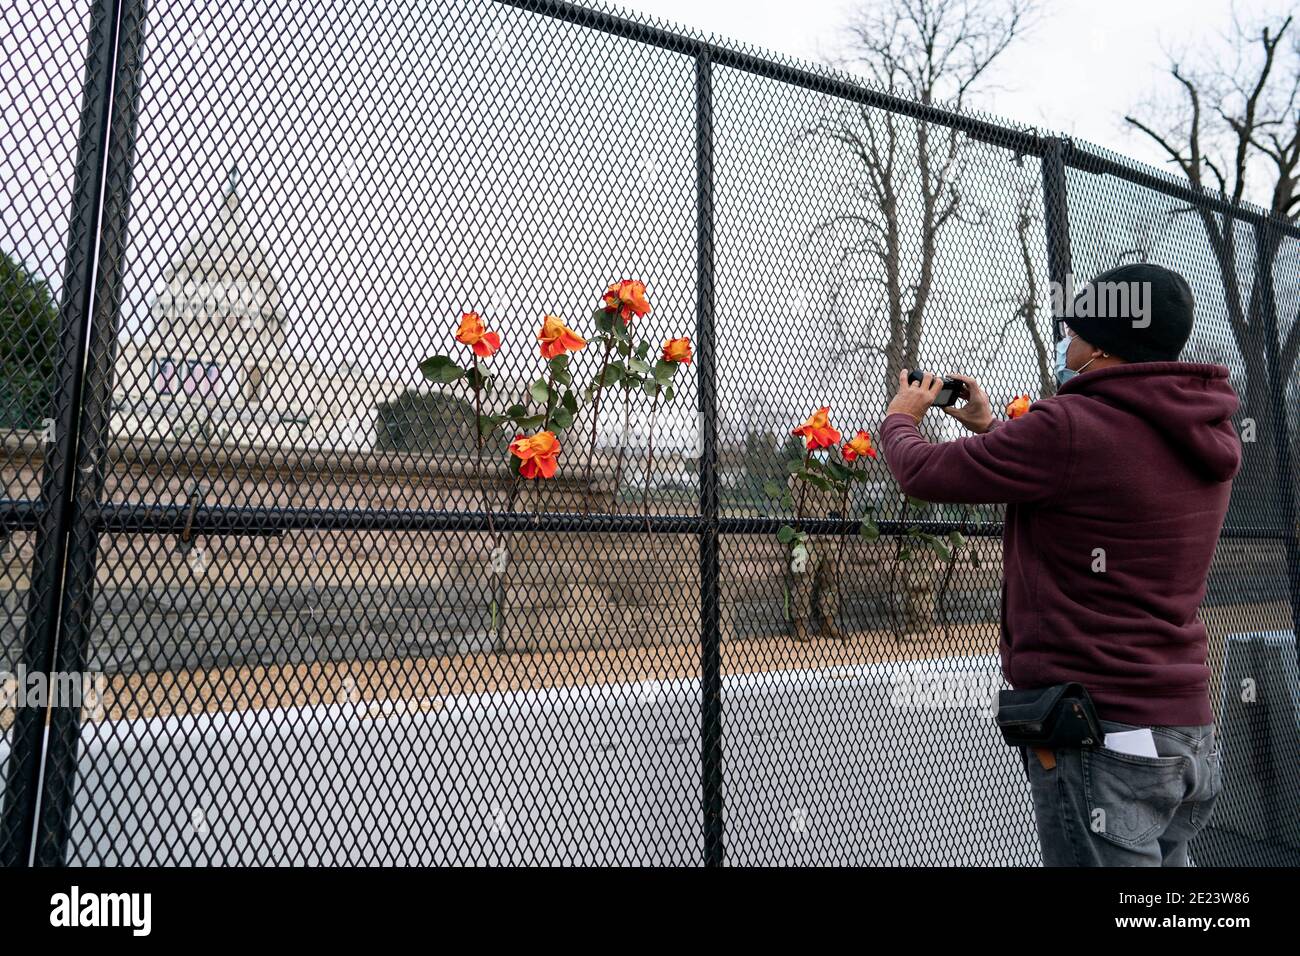 Washington, USA. 12th Jan, 2021. A man takes photos of the U.S. Capitol Building across a barrier fence in Washington, DC, the United States, Jan. 11, 2021. TO GO WITH 'U.S. House Democrats unveil article of impeachment against Trump'. Credit: Liu Jie/Xinhua/Alamy Live News Stock Photo